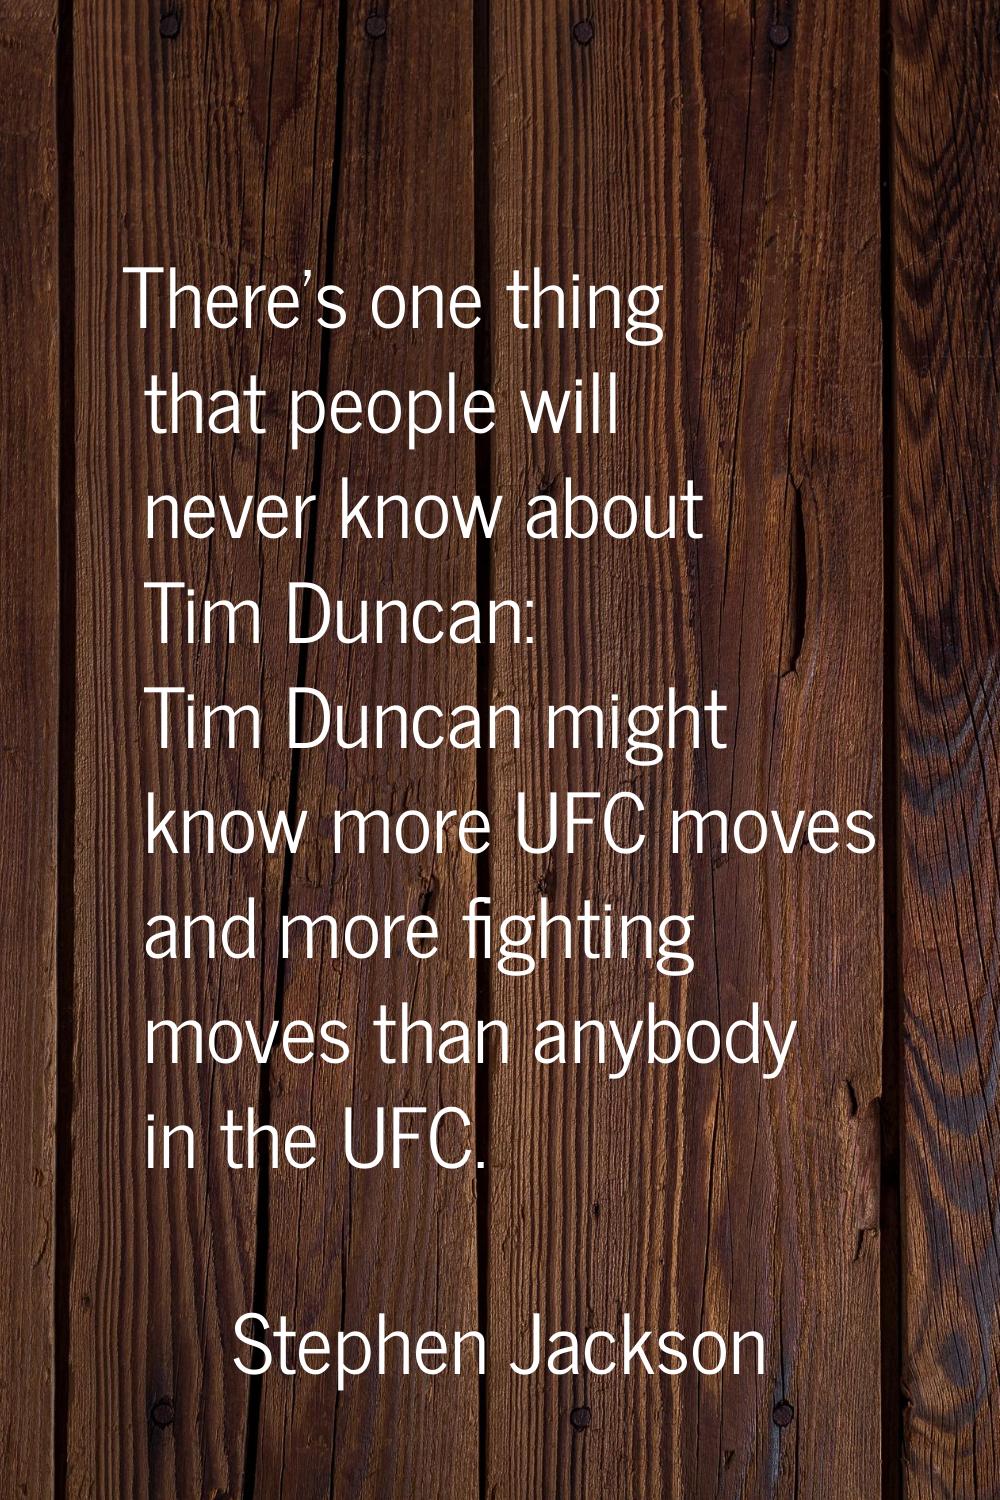 There's one thing that people will never know about Tim Duncan: Tim Duncan might know more UFC move